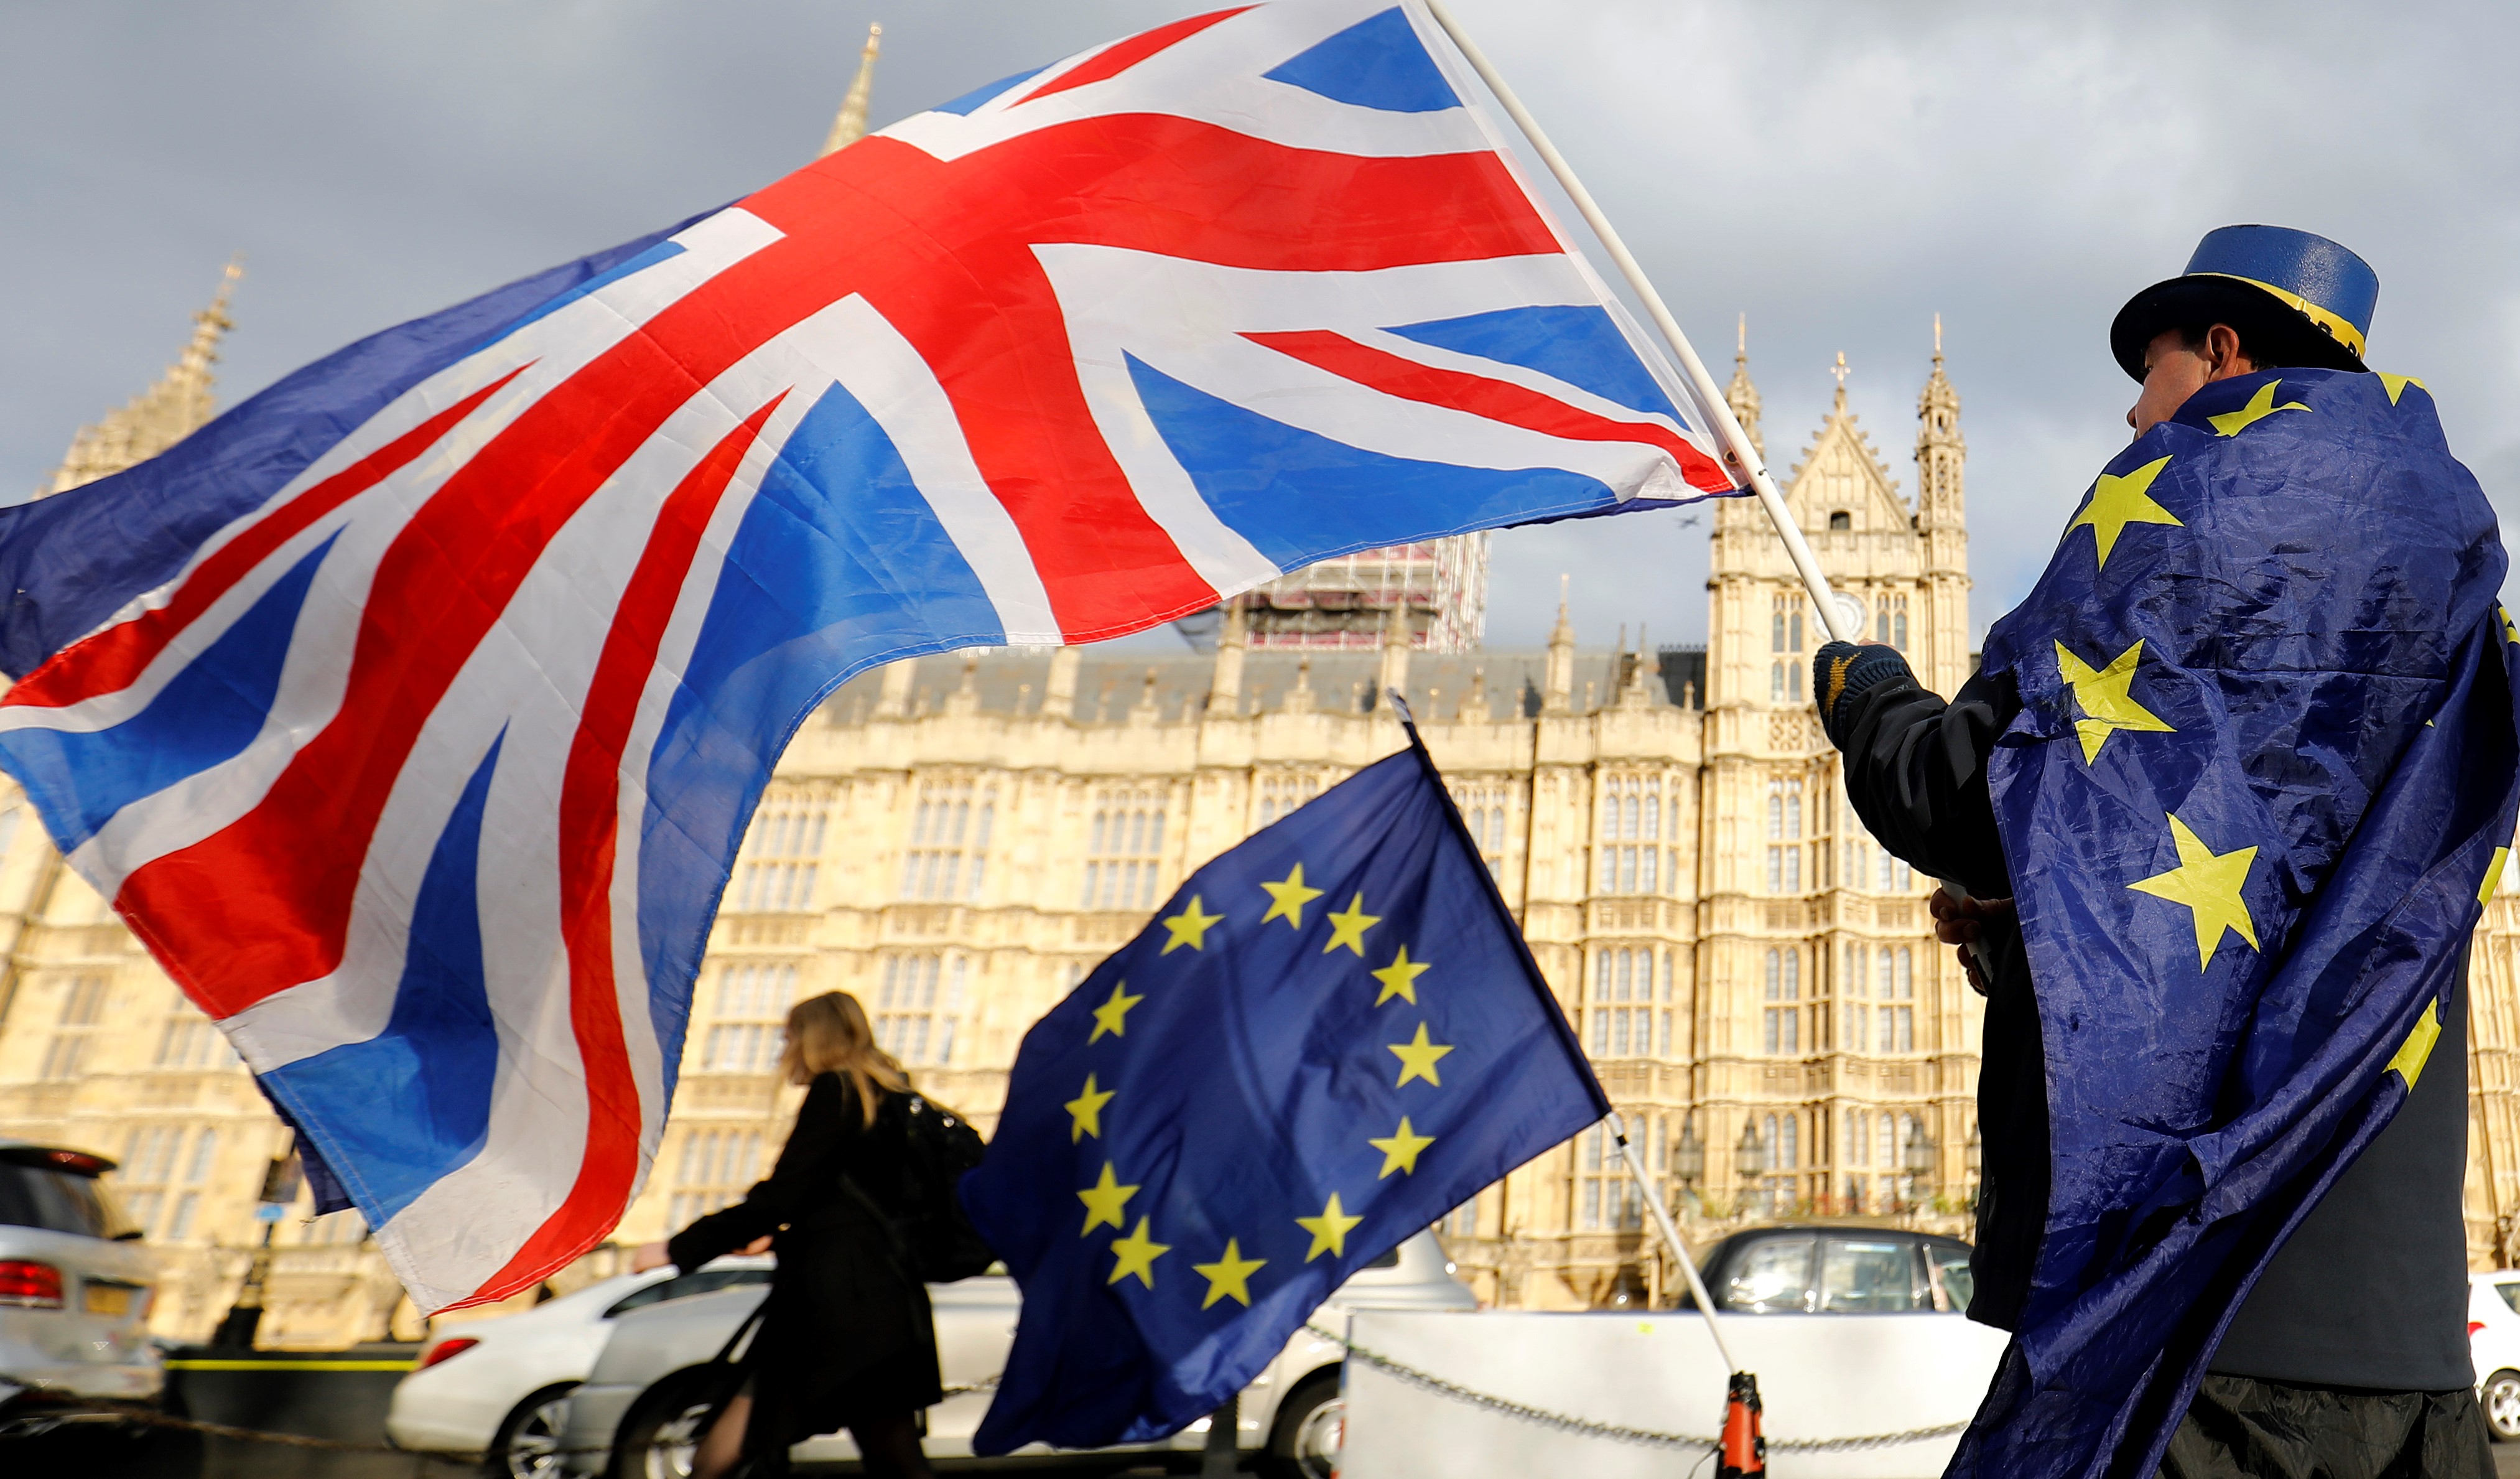  An anti-Brexit demonstrator waves a Union flag alongside a European Union flag outside the Houses of Parliament in London